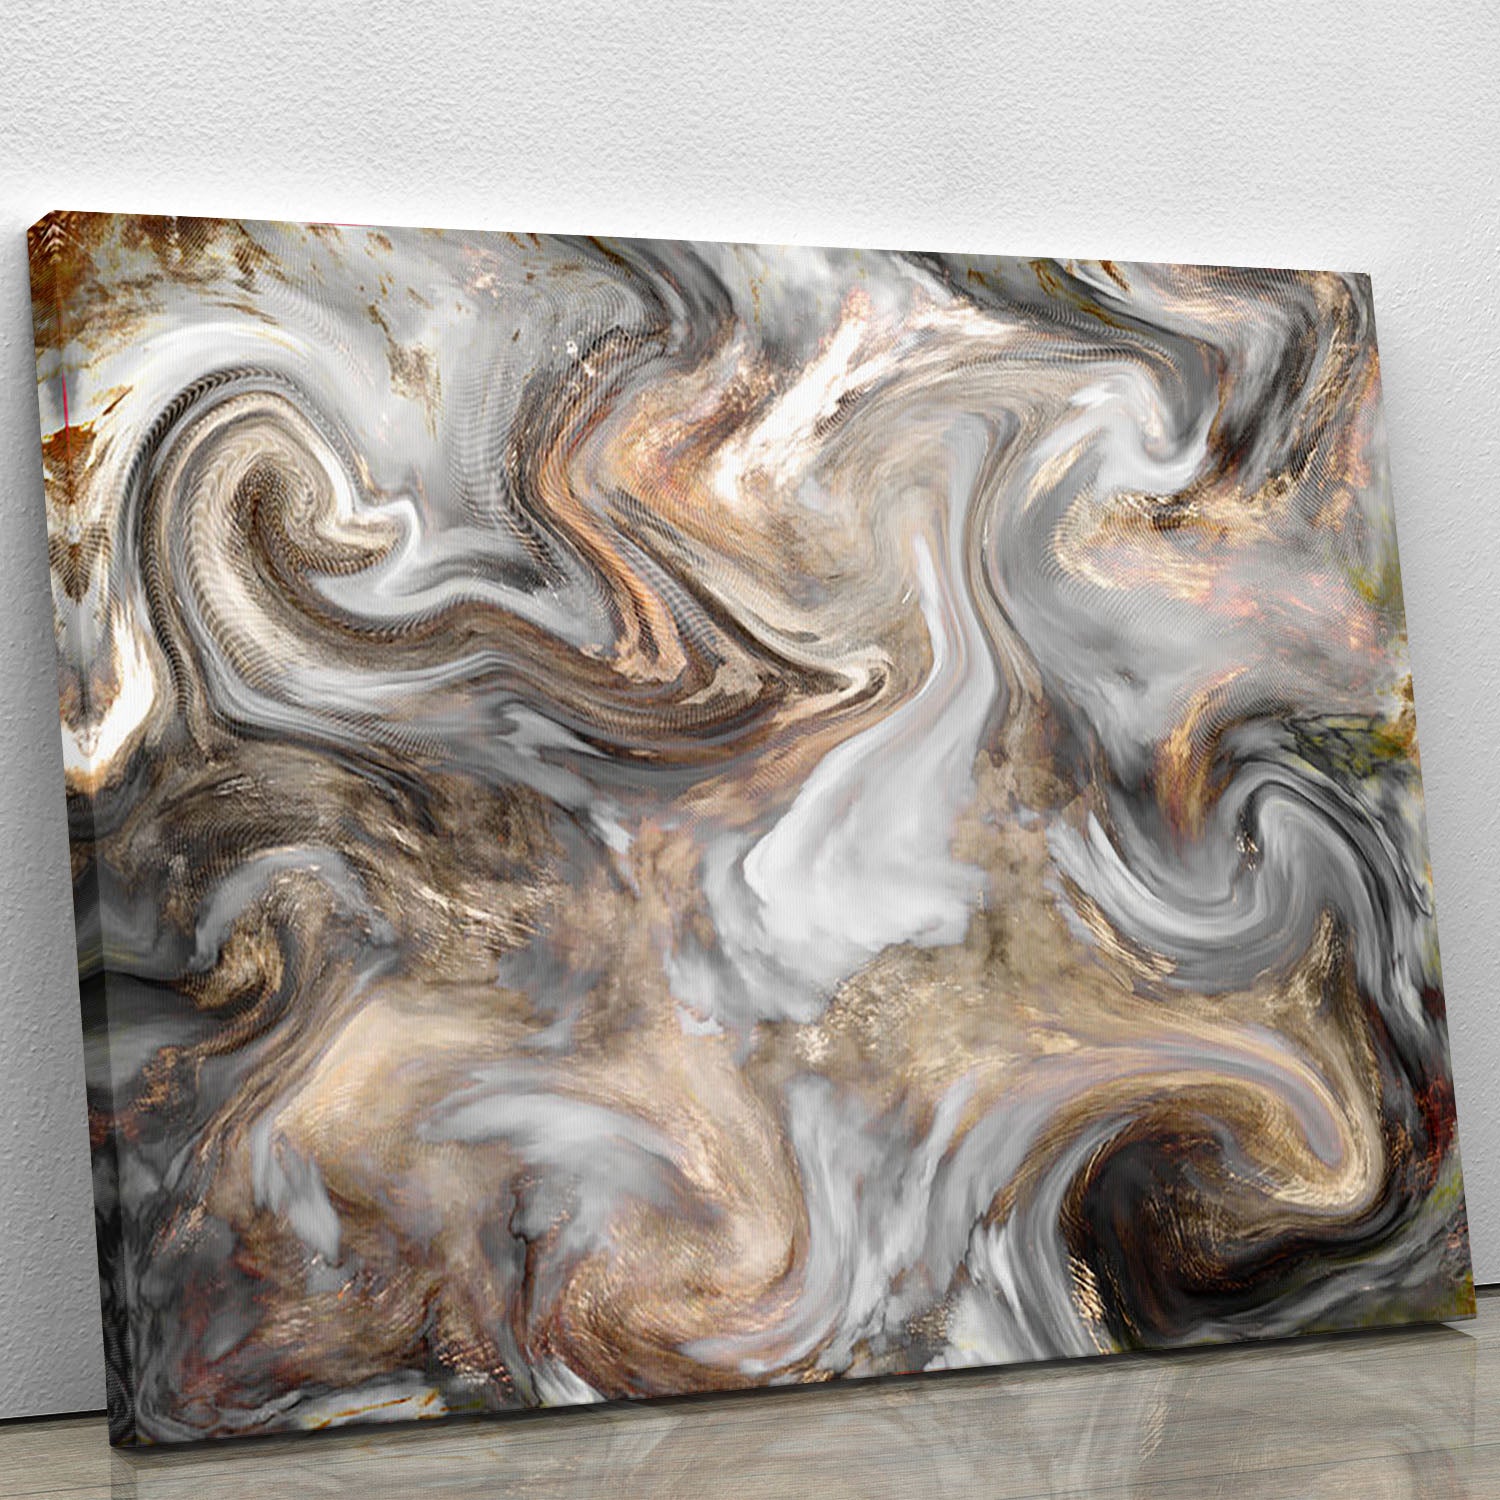 Neutral Stone Swirl Marble Canvas Print or Poster - Canvas Art Rocks - 1